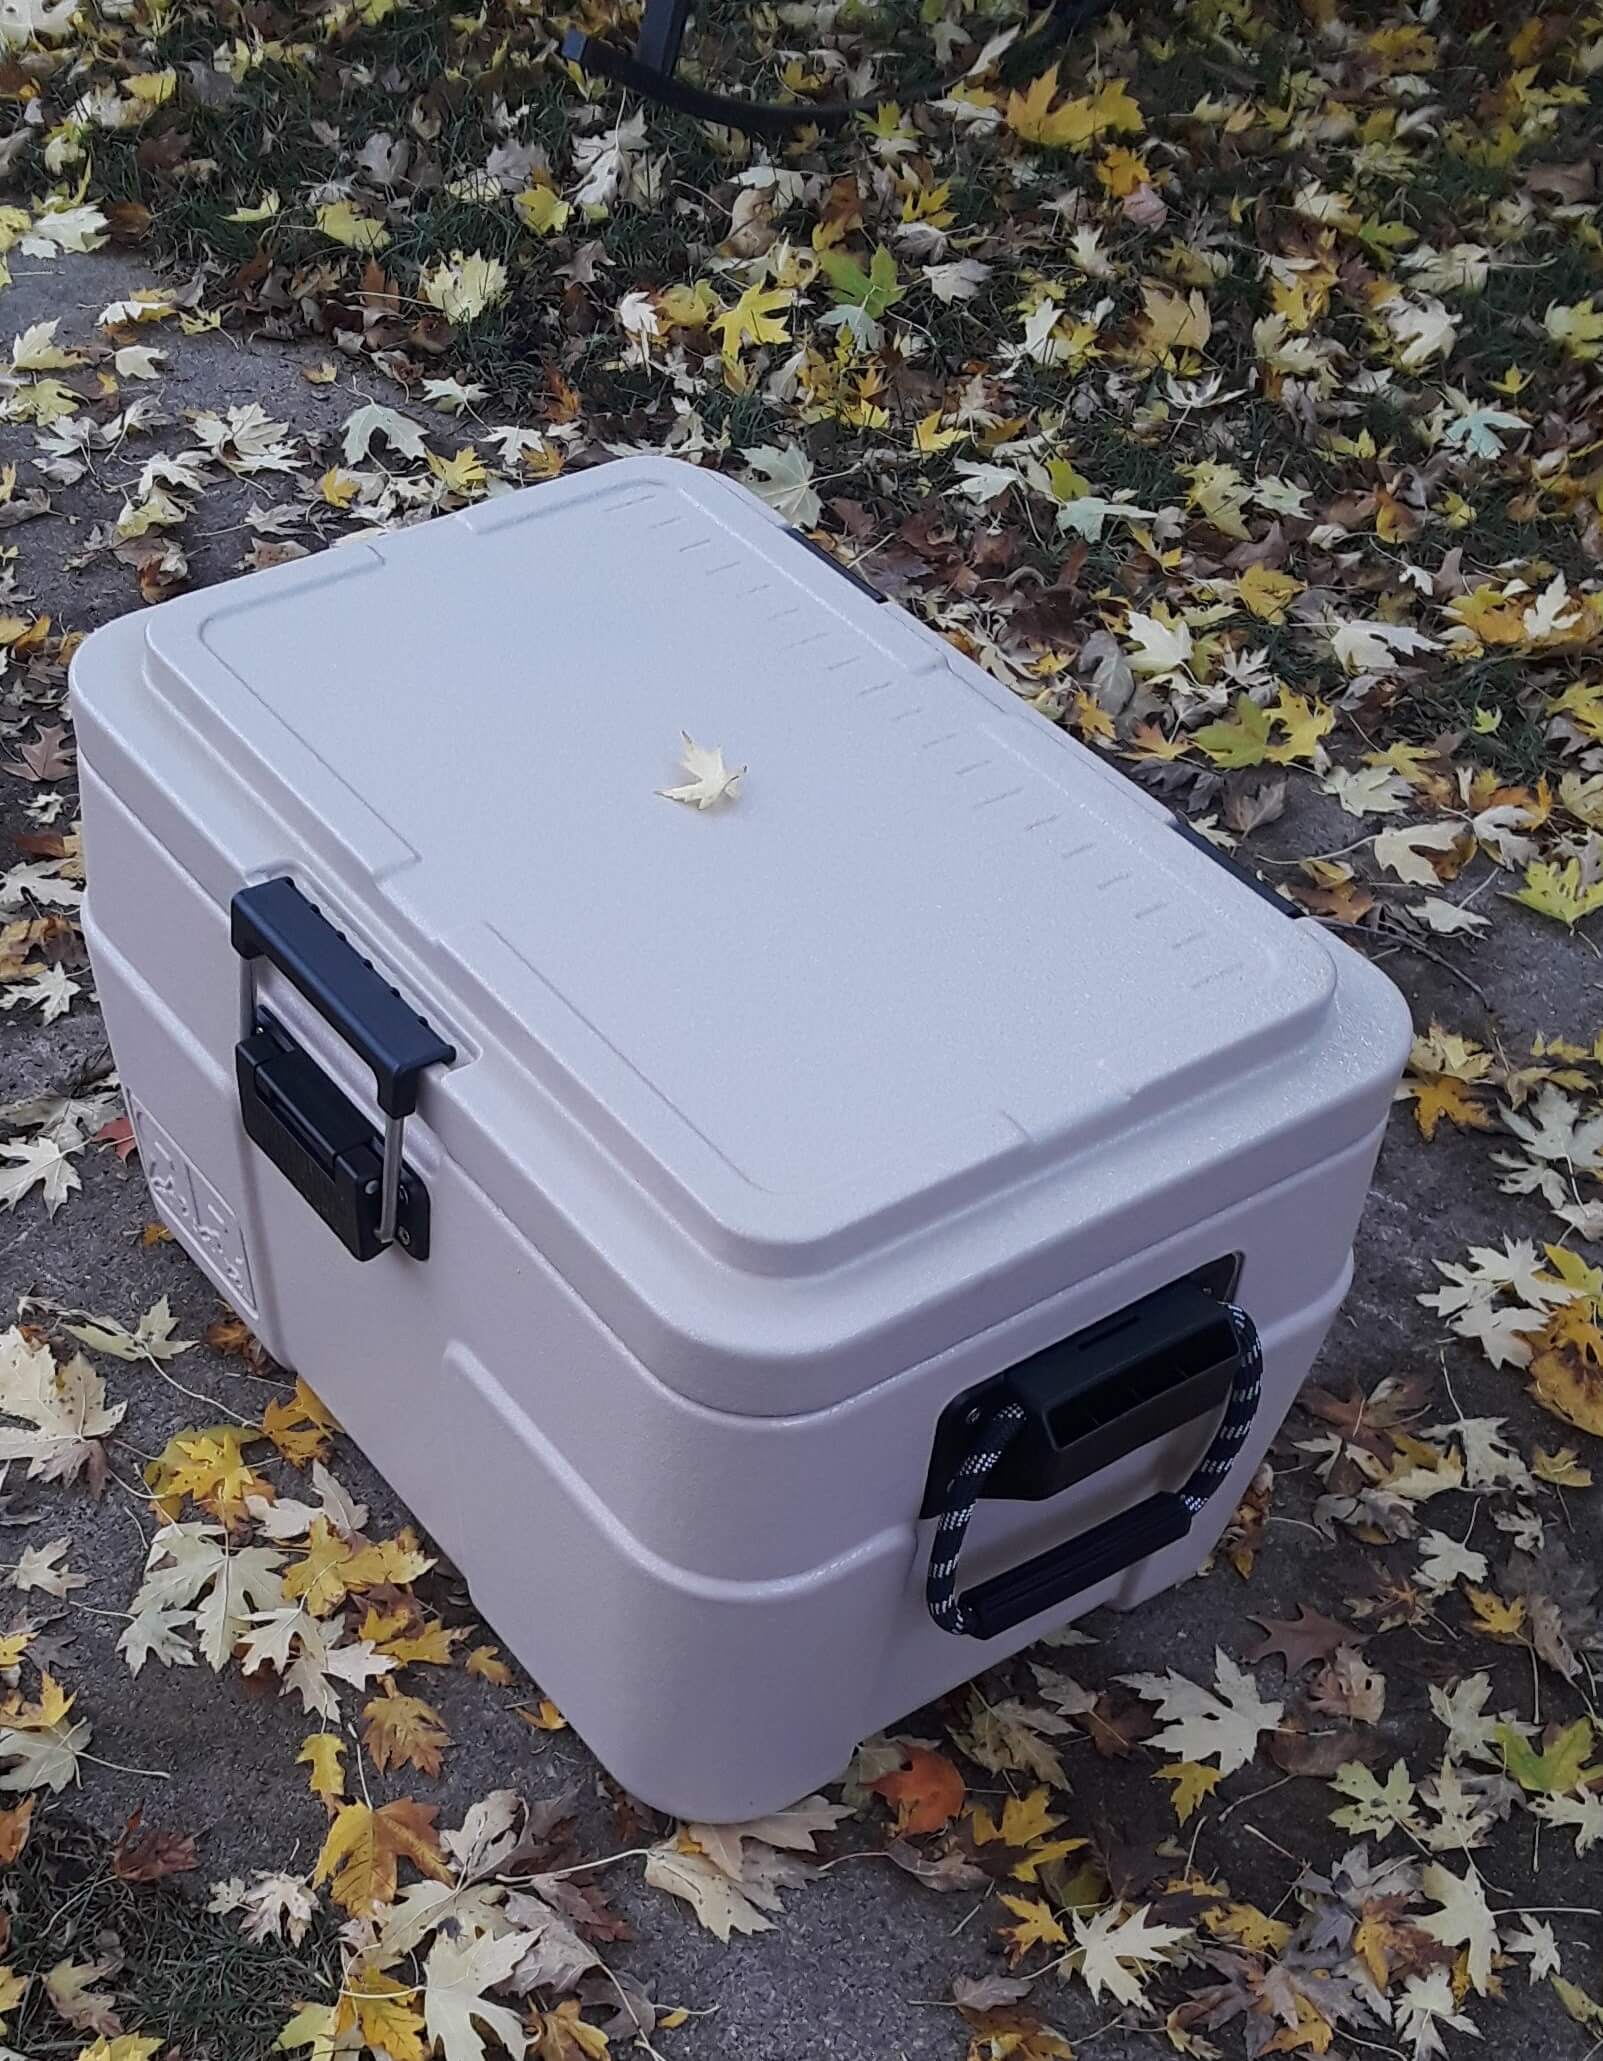 Rugged 'Adventure' Cooler Holds Ice For Days